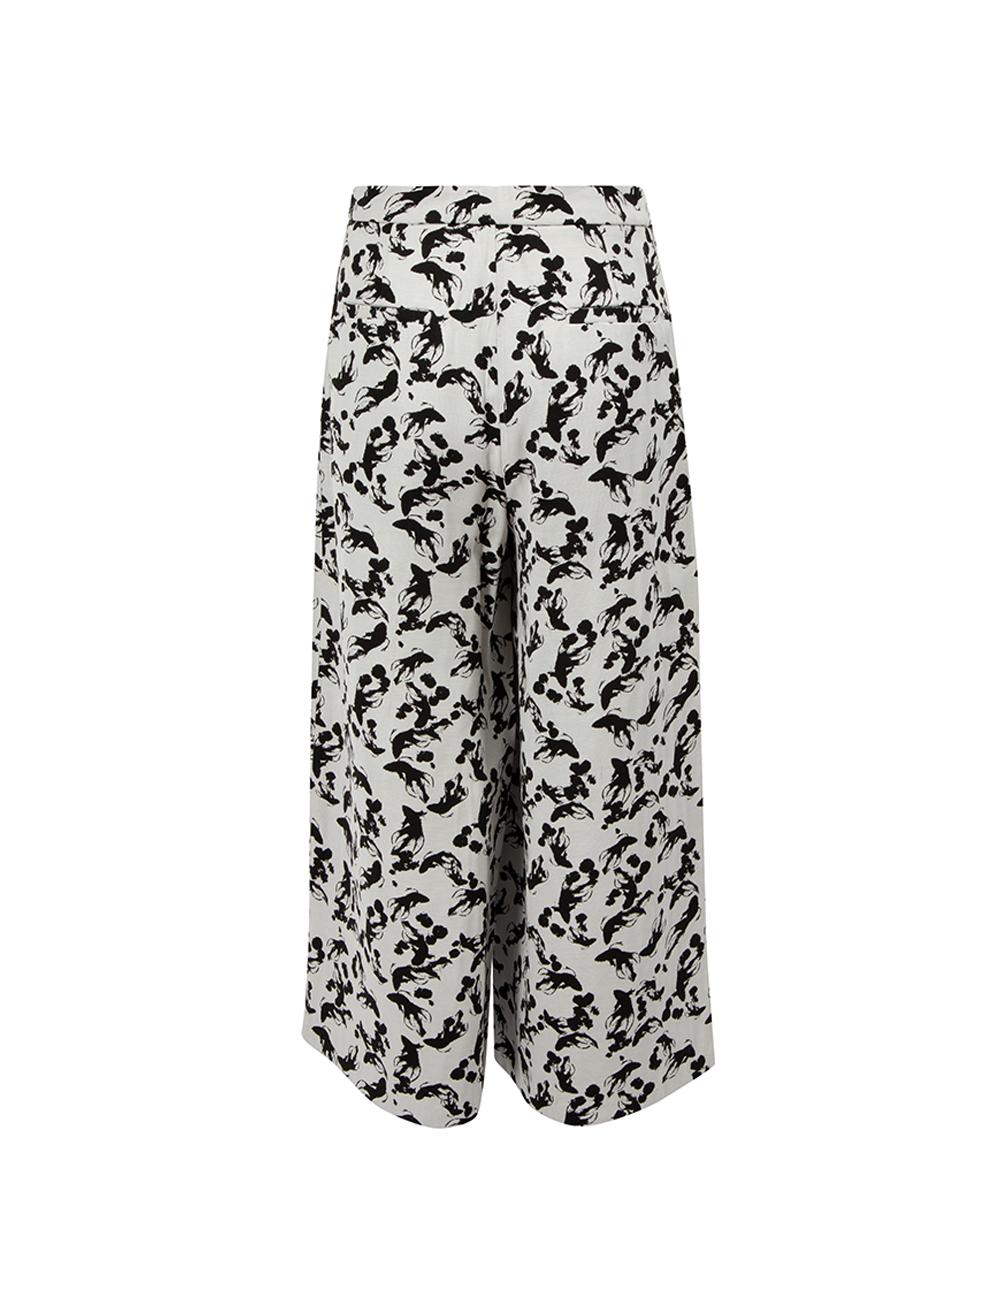 Tibi Women's Black & White Patterned Culottes In Good Condition For Sale In London, GB